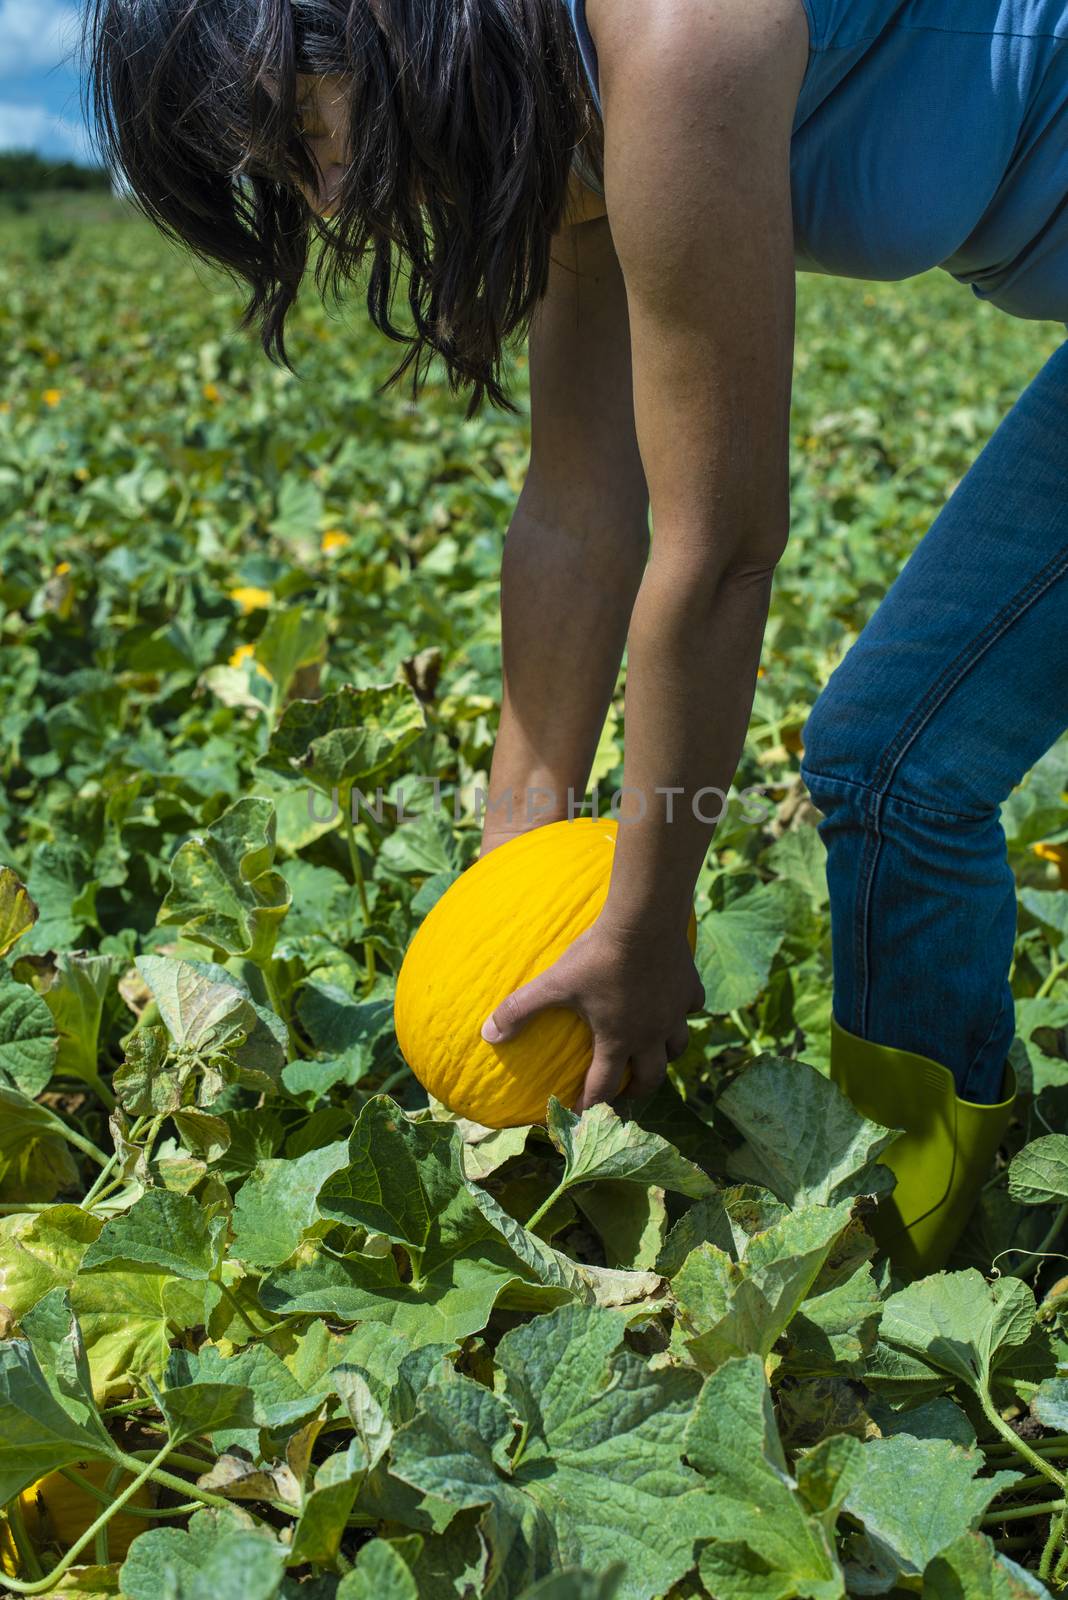 Harvest canary melons. Sunny day. Picking yellow melons in plantation. Woman hold melon in a big farm.